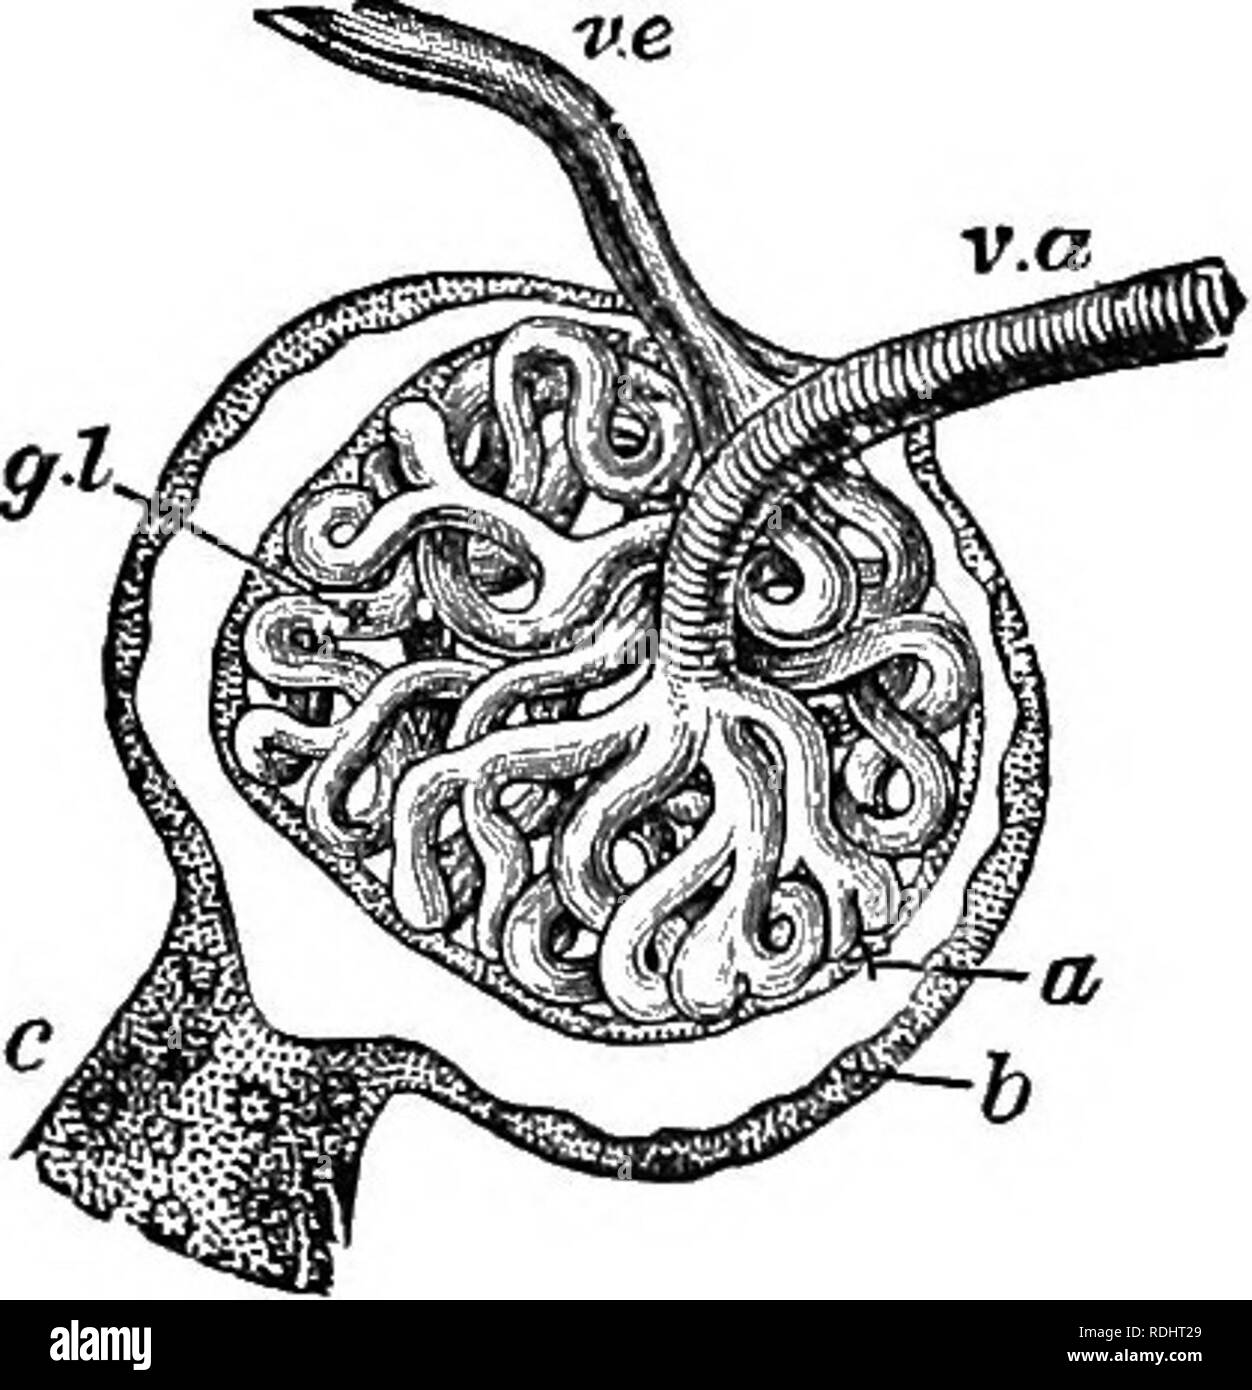 . A text-book in general physiology and anatomy. Physiology, Comparative; Anatomy. 370 EXCRETIOIT The entire length of the tube, its branches and capsules, is lined with epithelial gland cells. The relation of these parts is shown in Figure 172. Into each capsule enters a tiny branch of the renal artery and there brealcs up into a twisted knot of capillaries called a glomerulus which. Fig. 171 — A Malpigbian capsule; V. a, small branch of renal artery breaking up in the glom- erulus (f/./) into capillaries, which in turn unite into the renal vein (I'.e); -:, tubule; «, epithelium over the glom Stock Photo